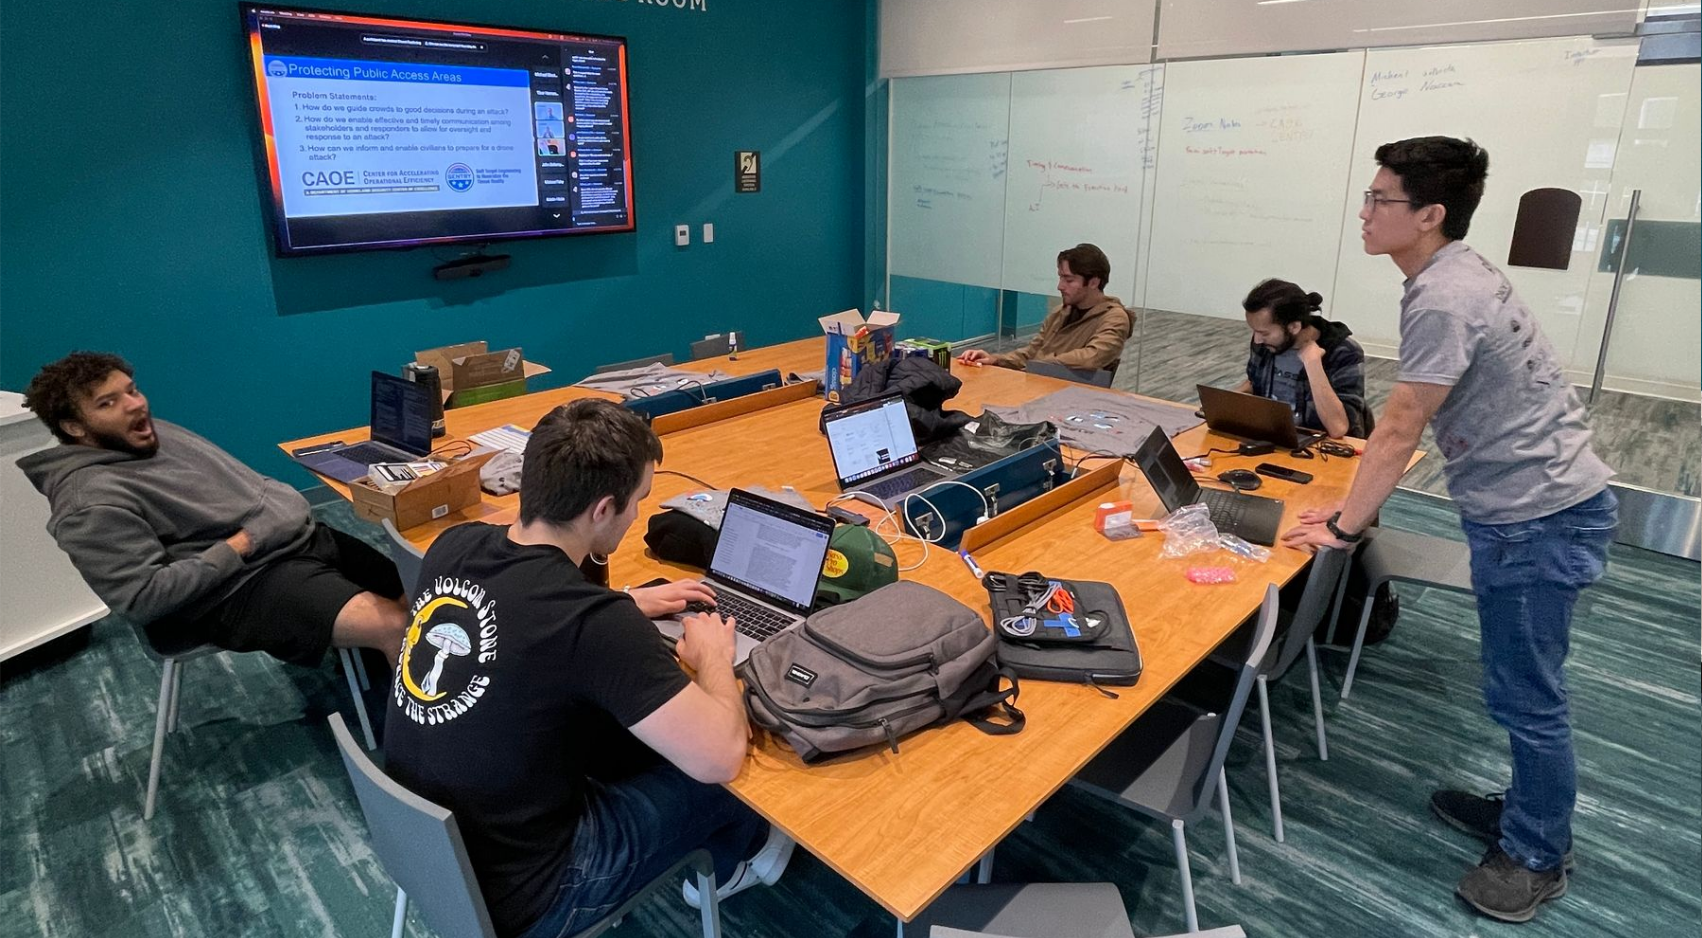 Team AzTechs work on their safe evacuation system submission in the William G. Tong Conference Room in the Engineering and Interdisciplinary Sciences (EIS) Building.